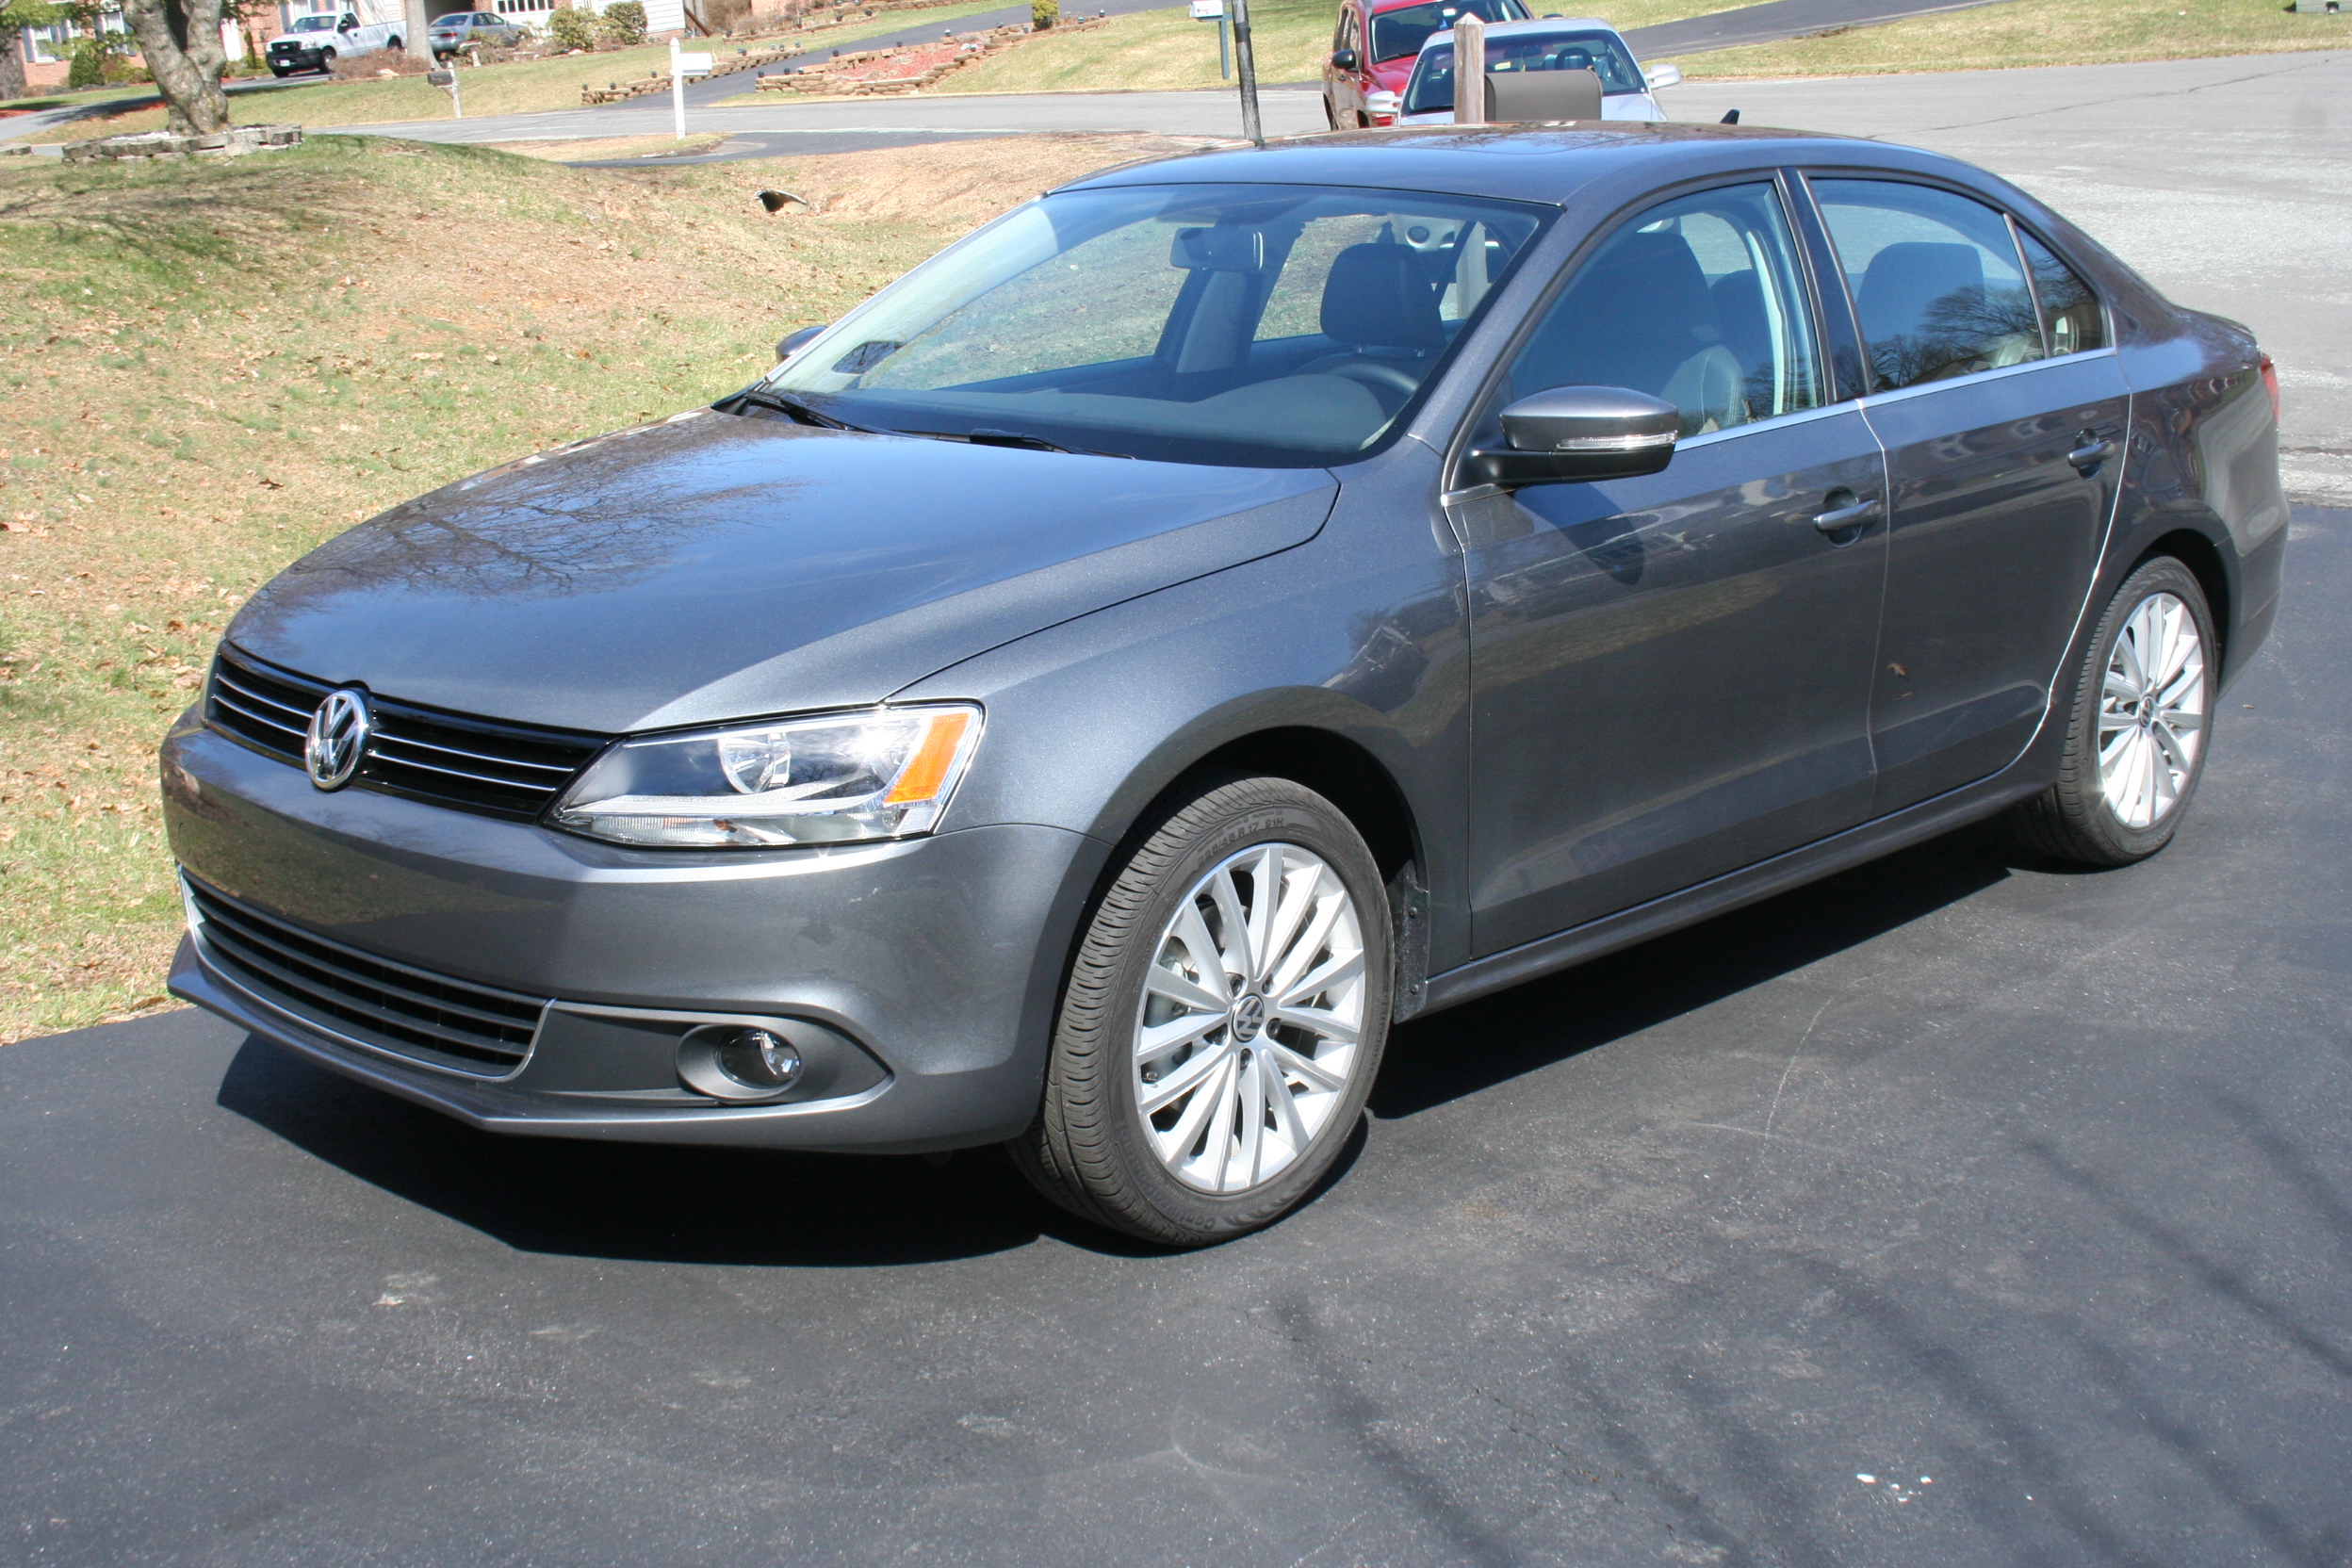 Car Report: 2014 Jetta’s smaller engine packs a surprising punch